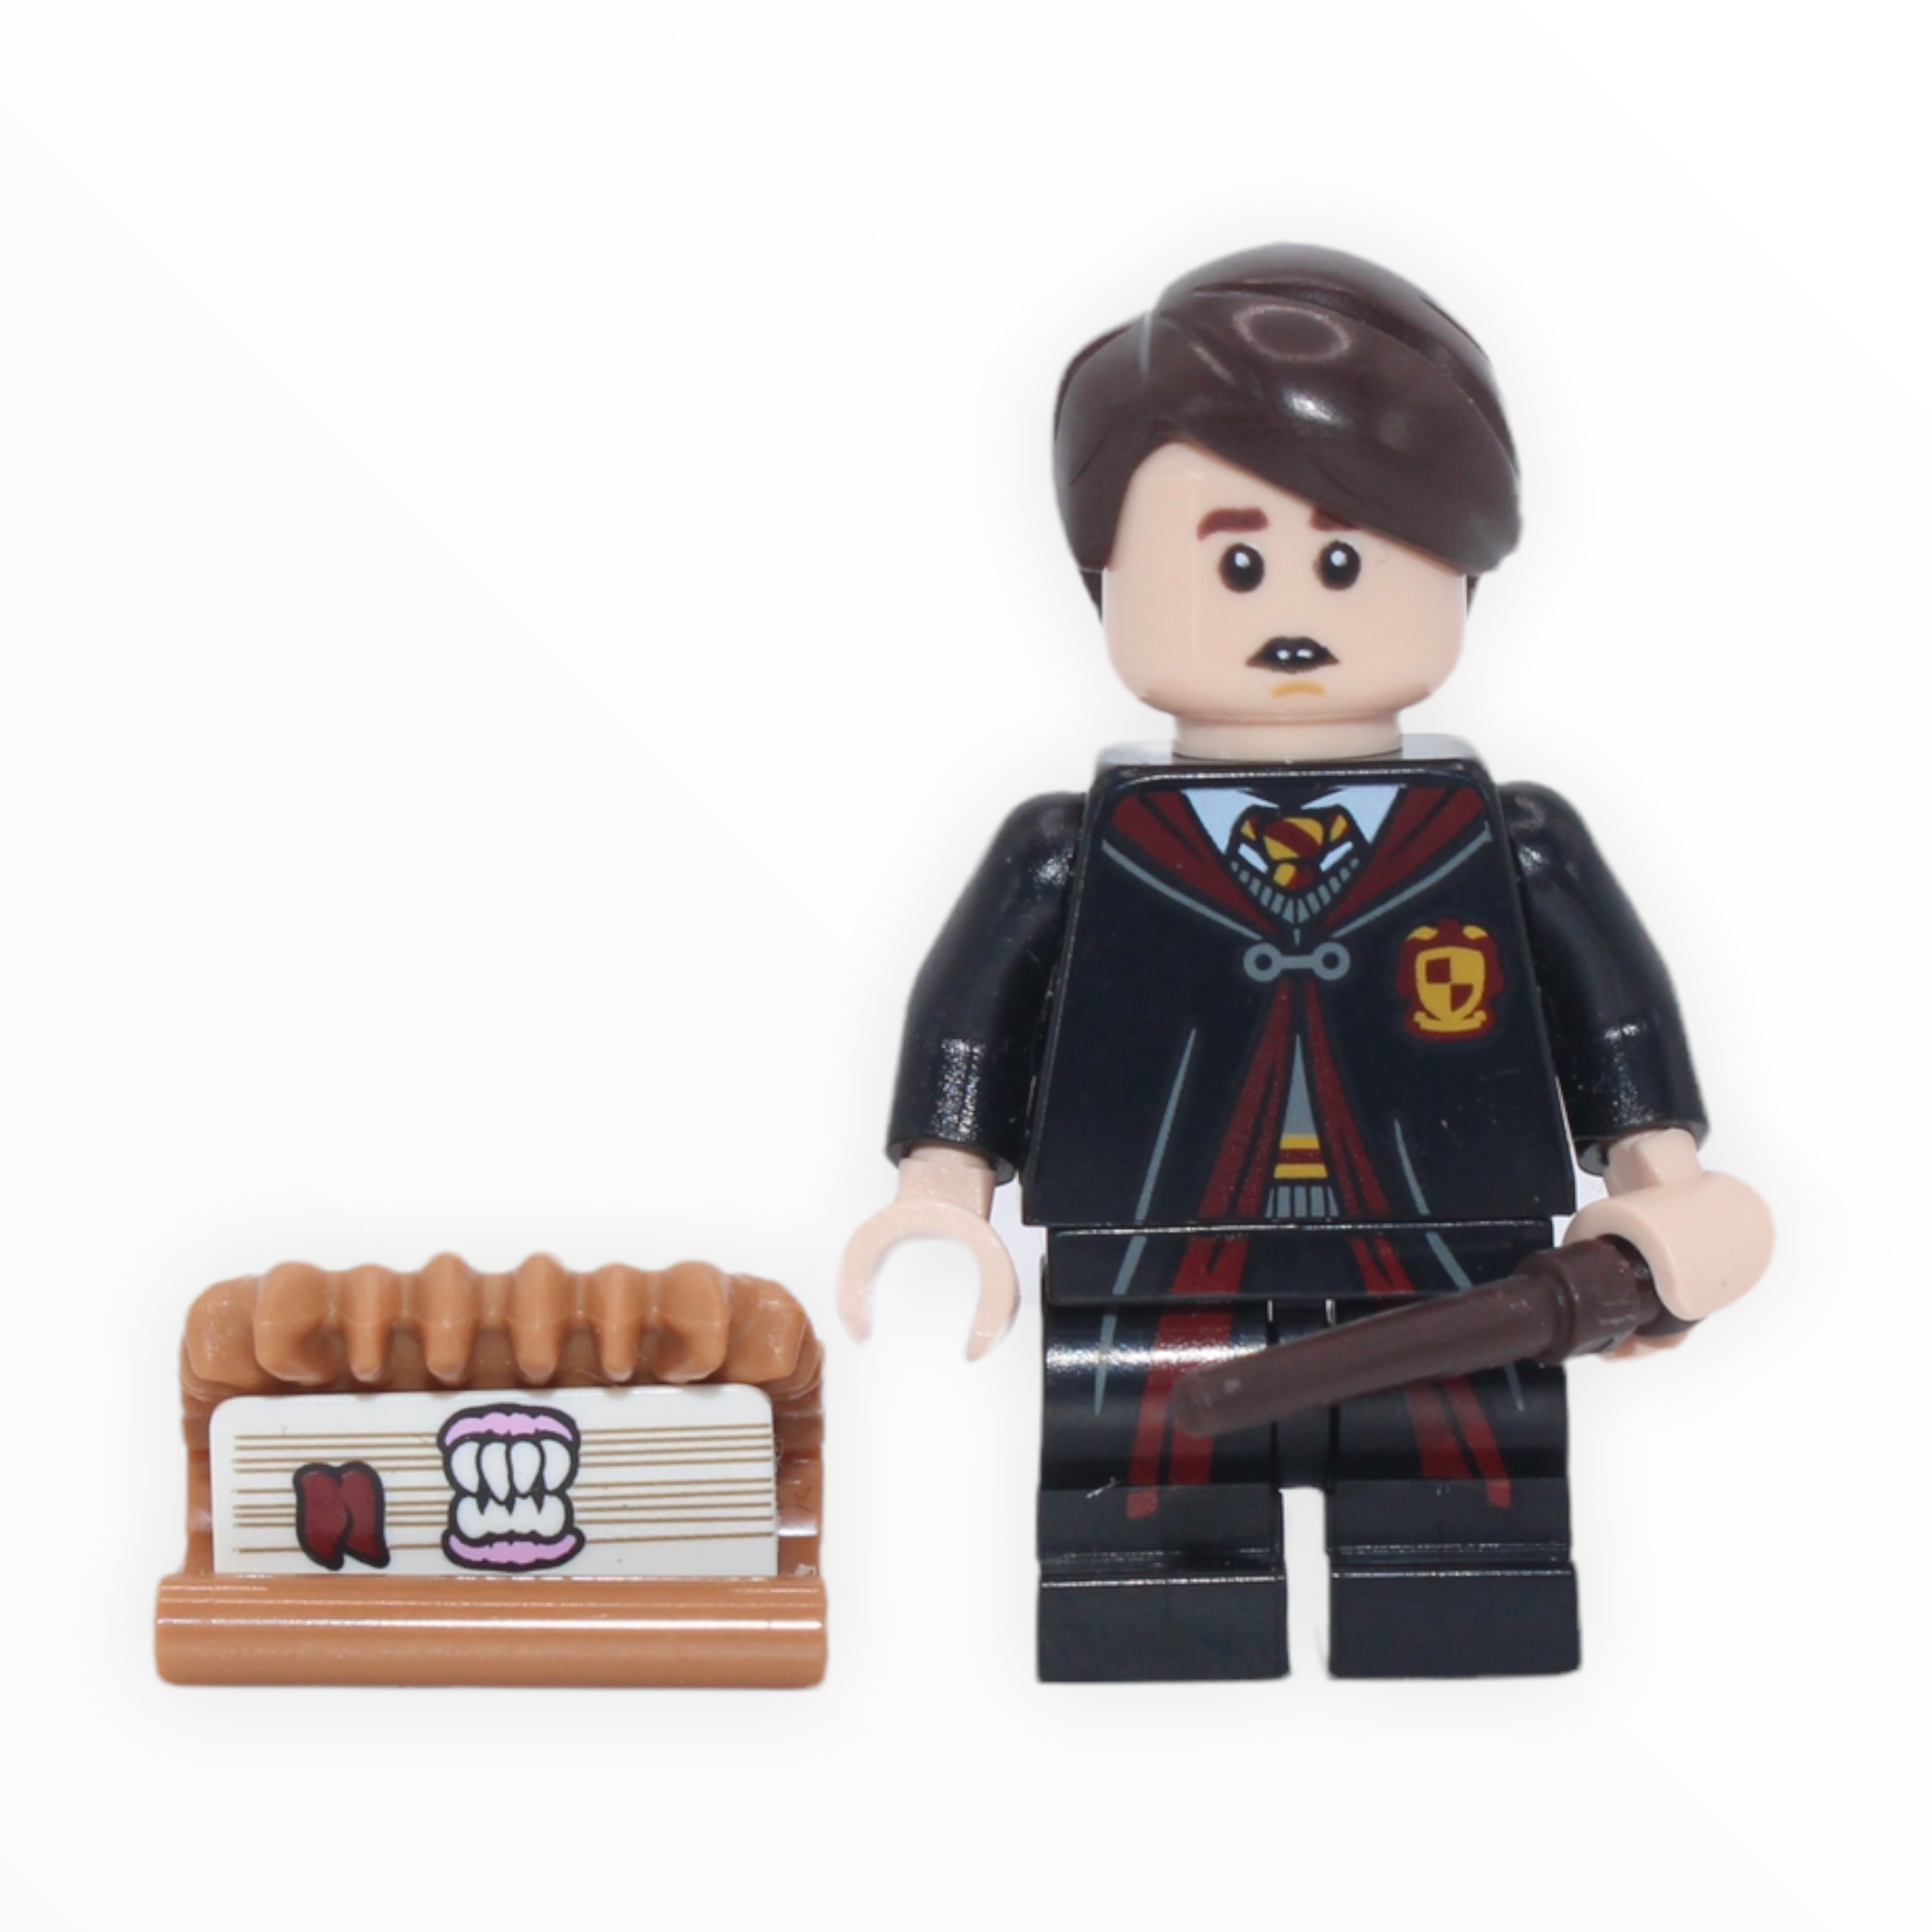 Harry Potter Series 2: Neville Longbottom with Monster Book of Monsters